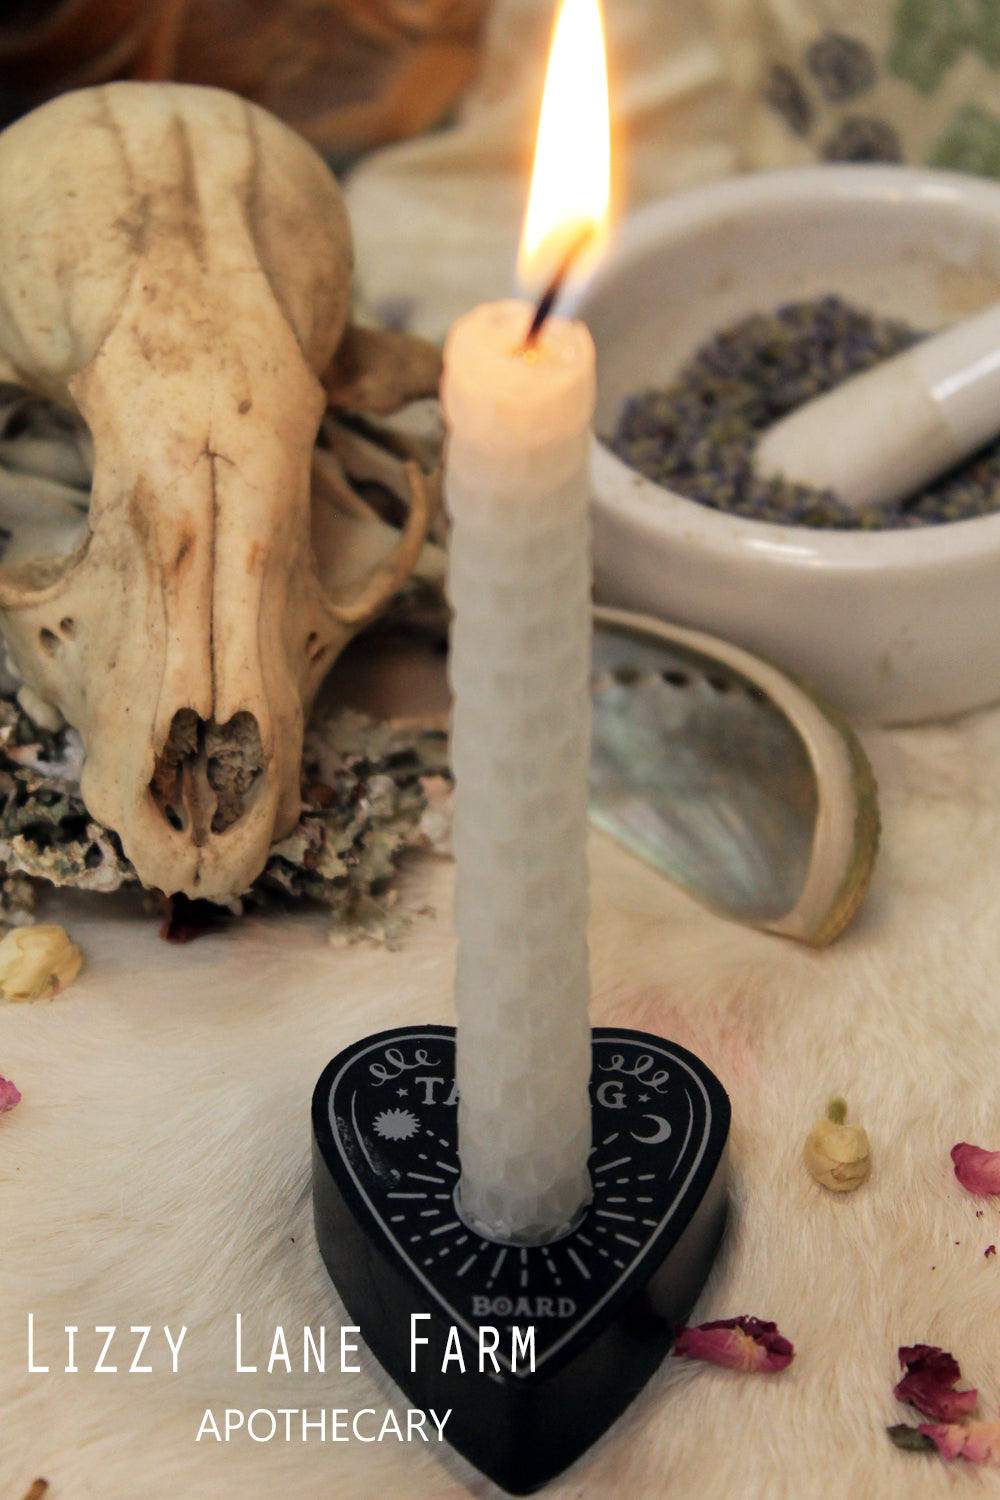 Hand-Rolled Beeswax Mini Intention Candles